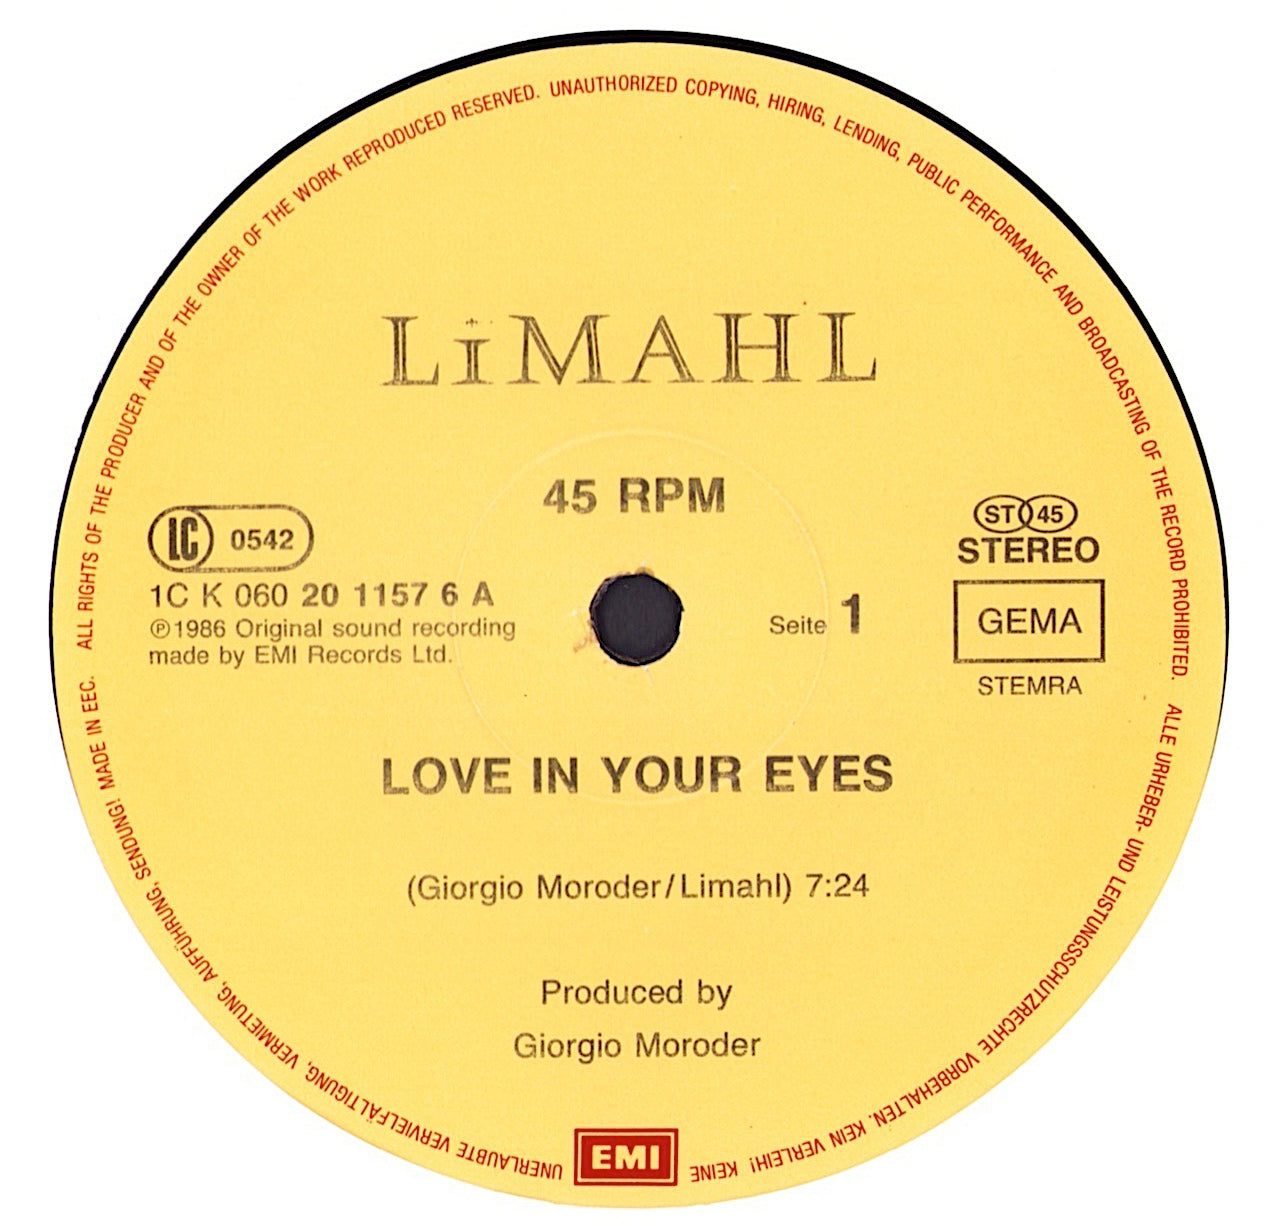 Limahl - Love In Your Eyes Vinyl 12" Maxi-Single